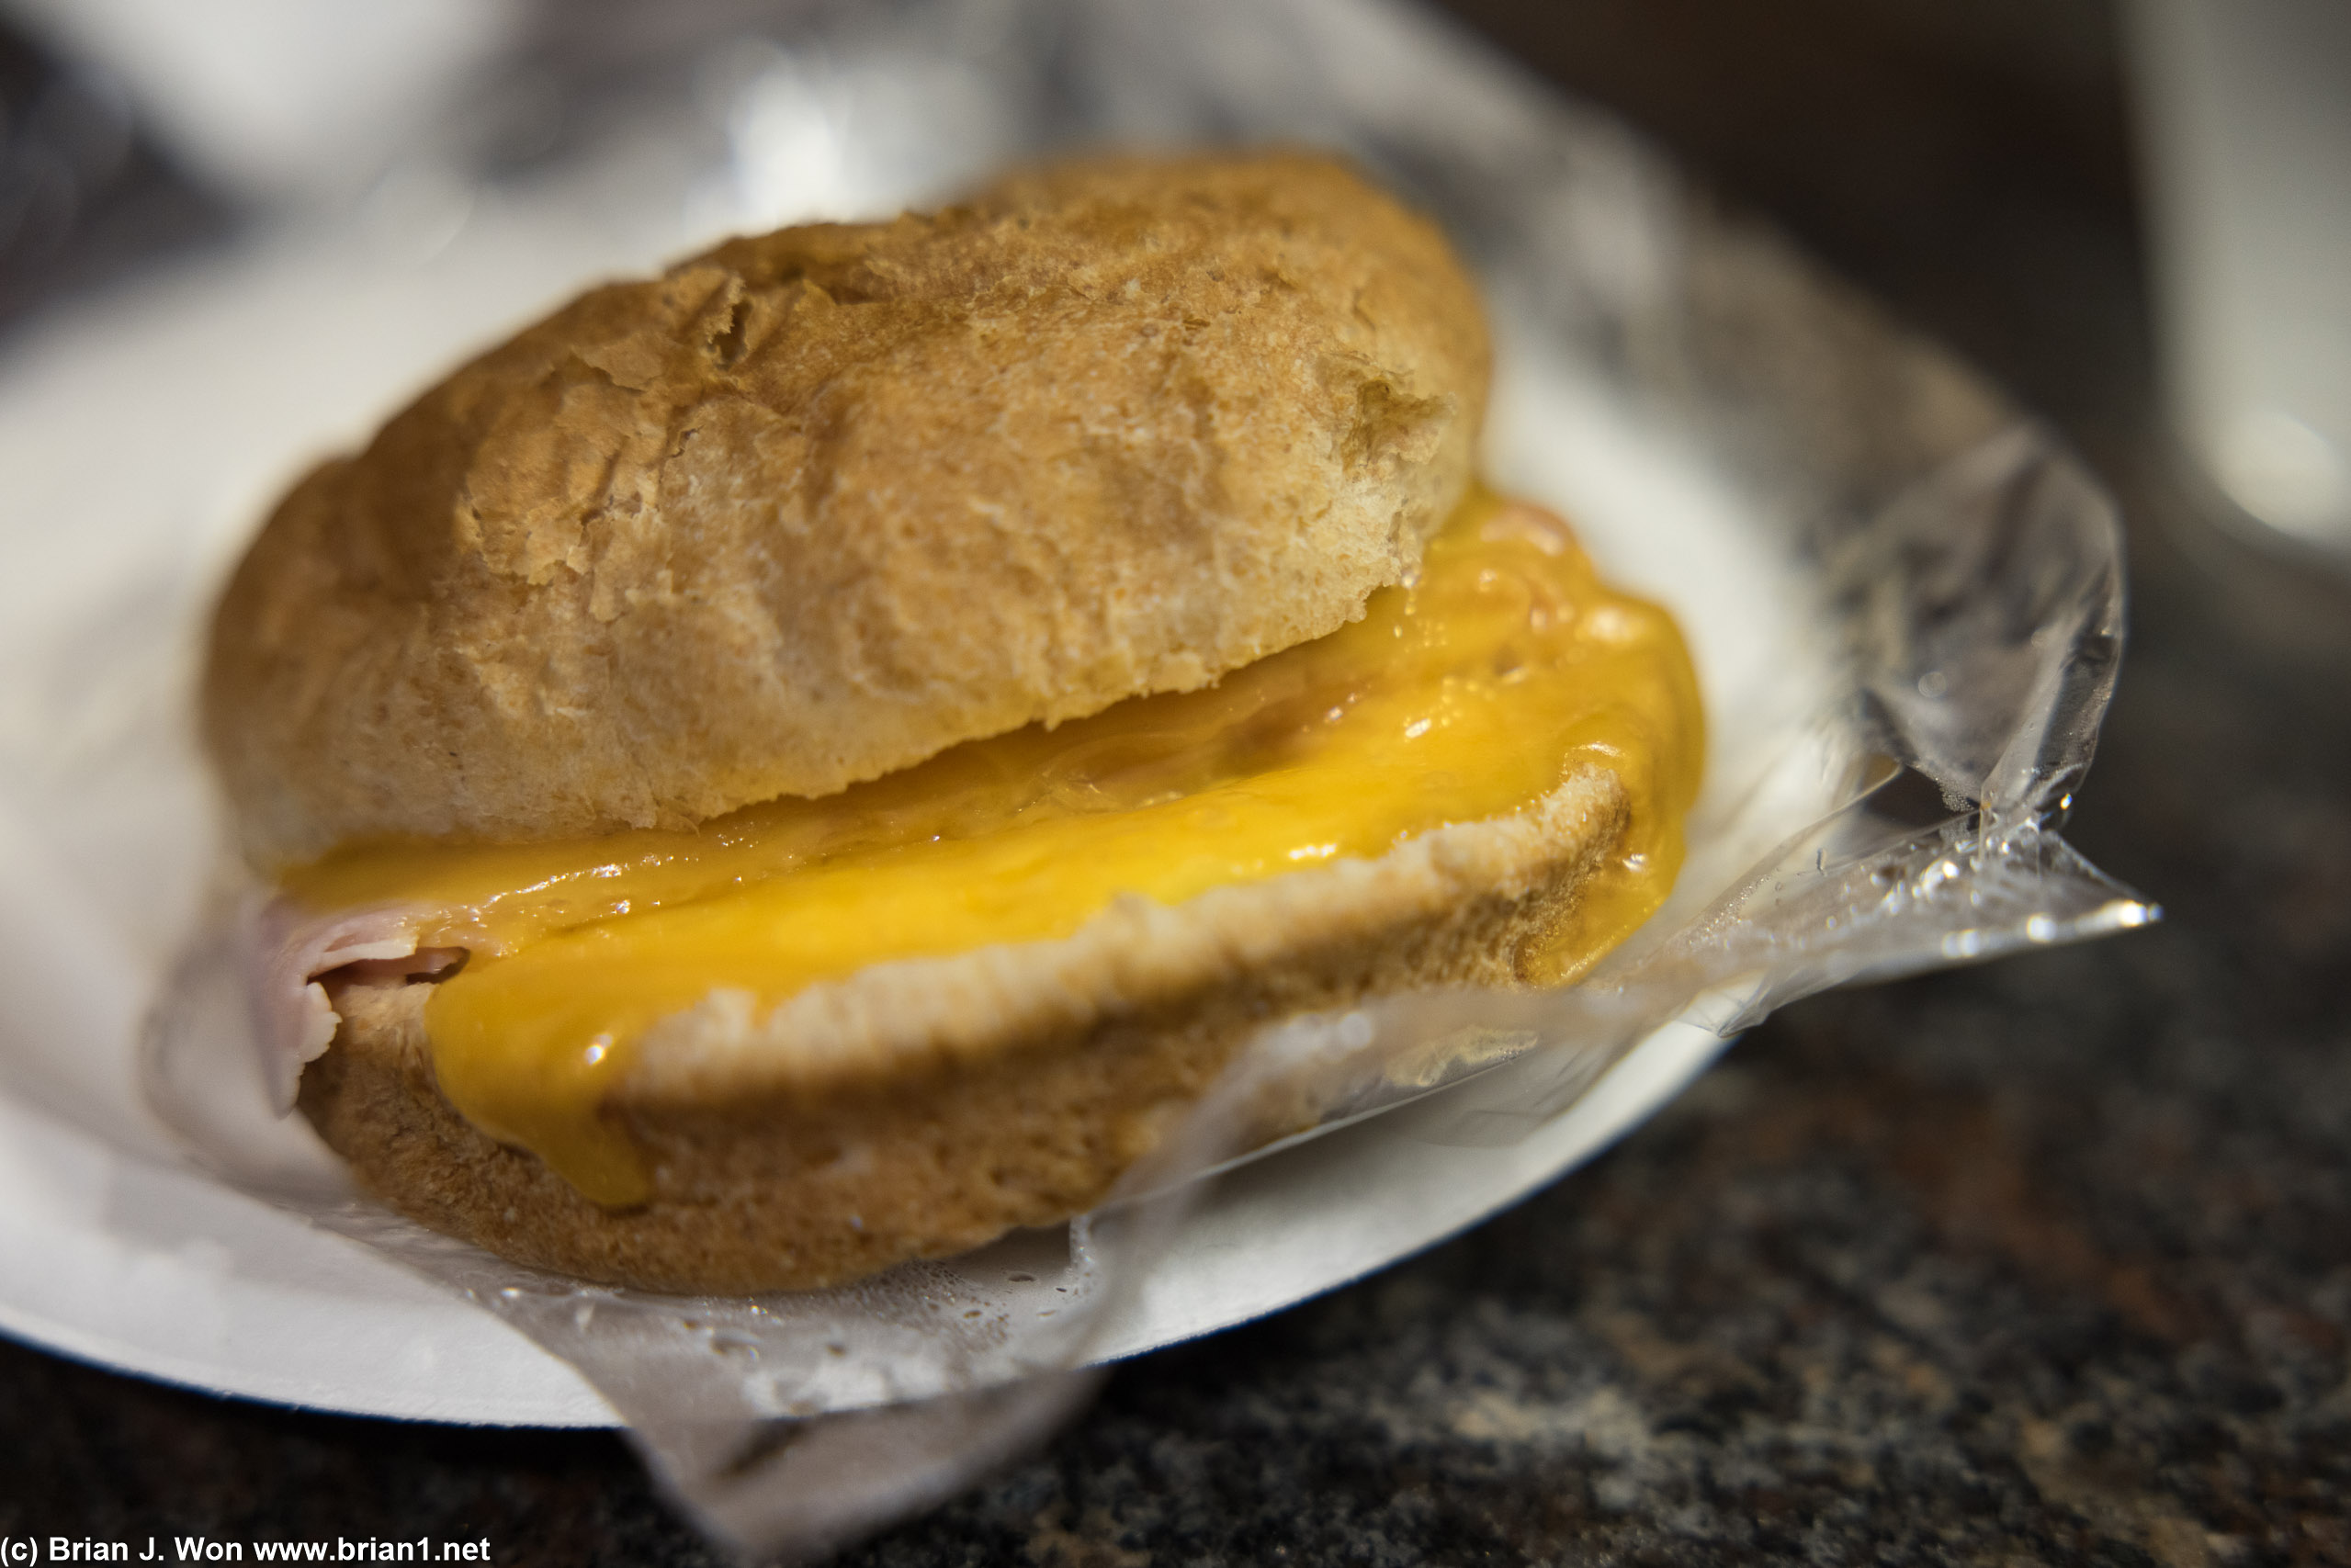 This is supposedly an edible breakfast sandwich.